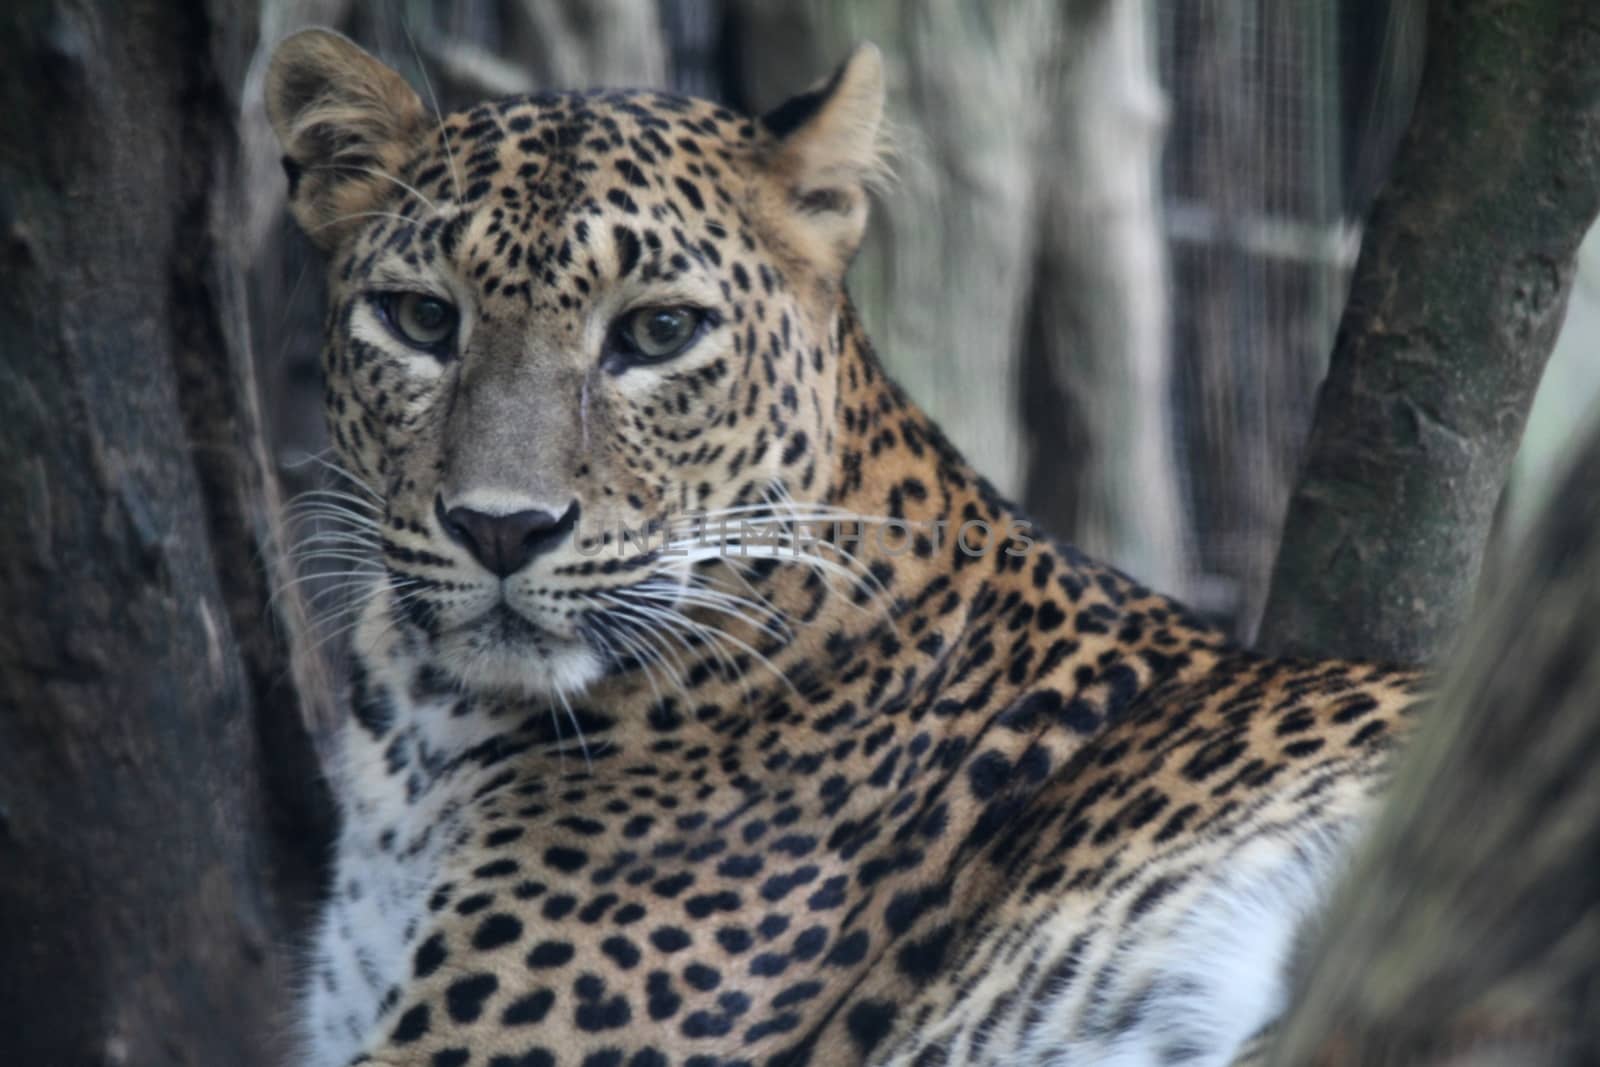 A wild life shot of a leopard in captivity